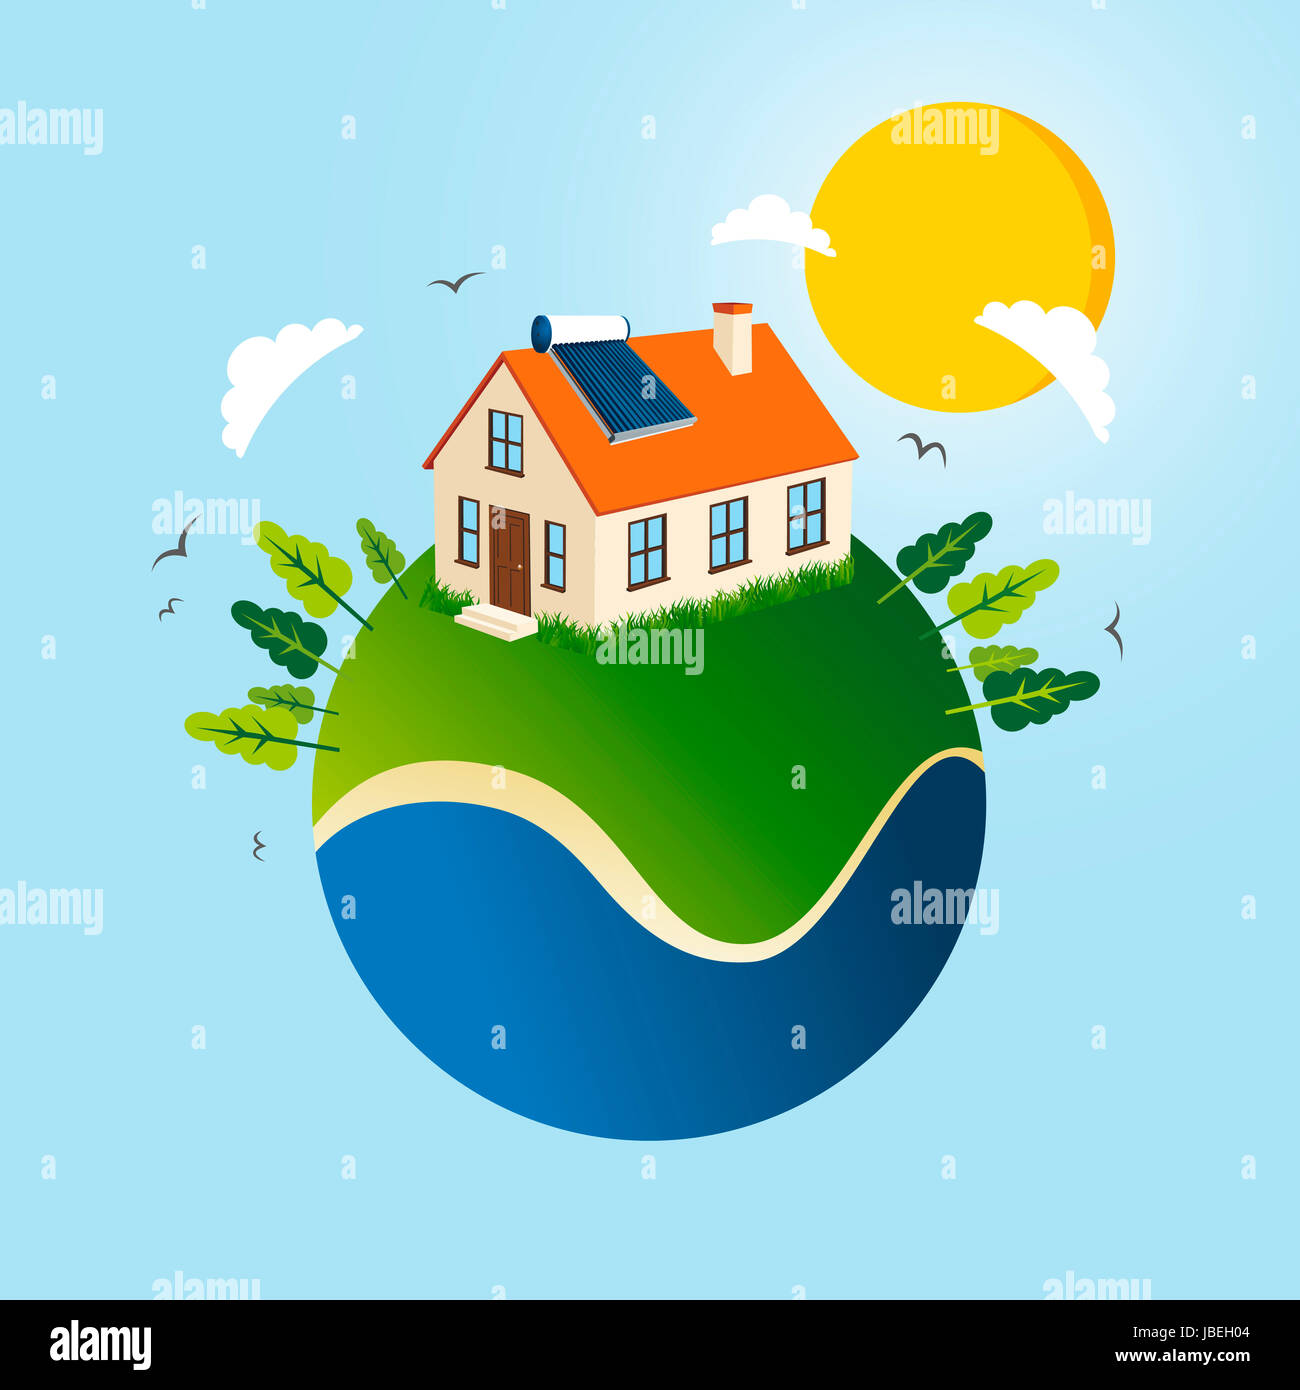 Green Environmental Protection Vector Art PNG, Solar Panel Charging Vehicle Environmental  Protection And Green Energy Concept Illustration, Environmental Protection,  Green, Energy PNG Image For Free Download